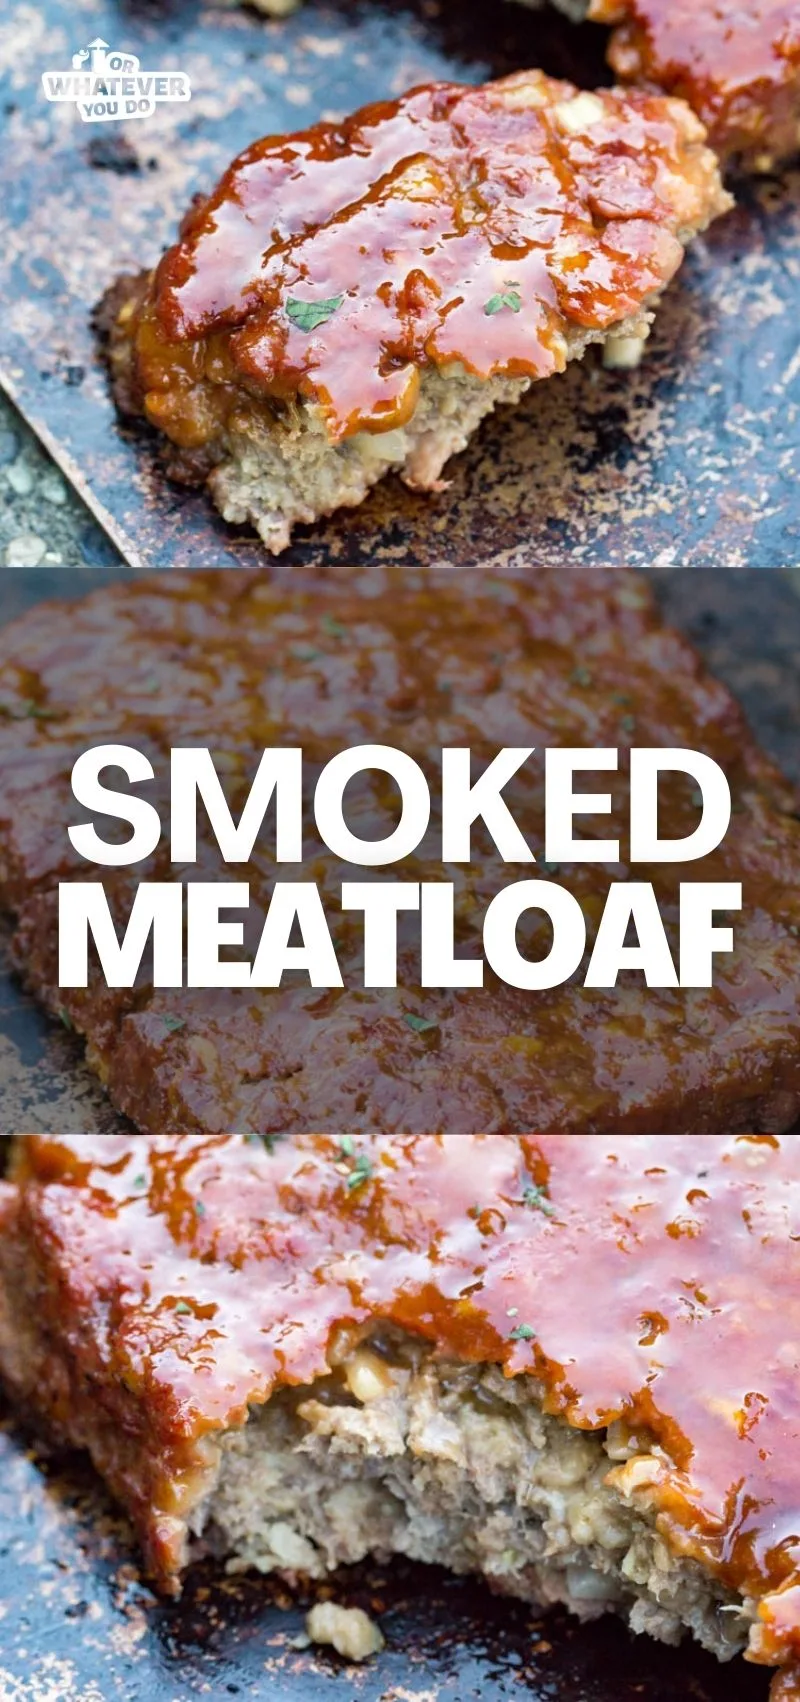 Traeger Smoked Meatloaf